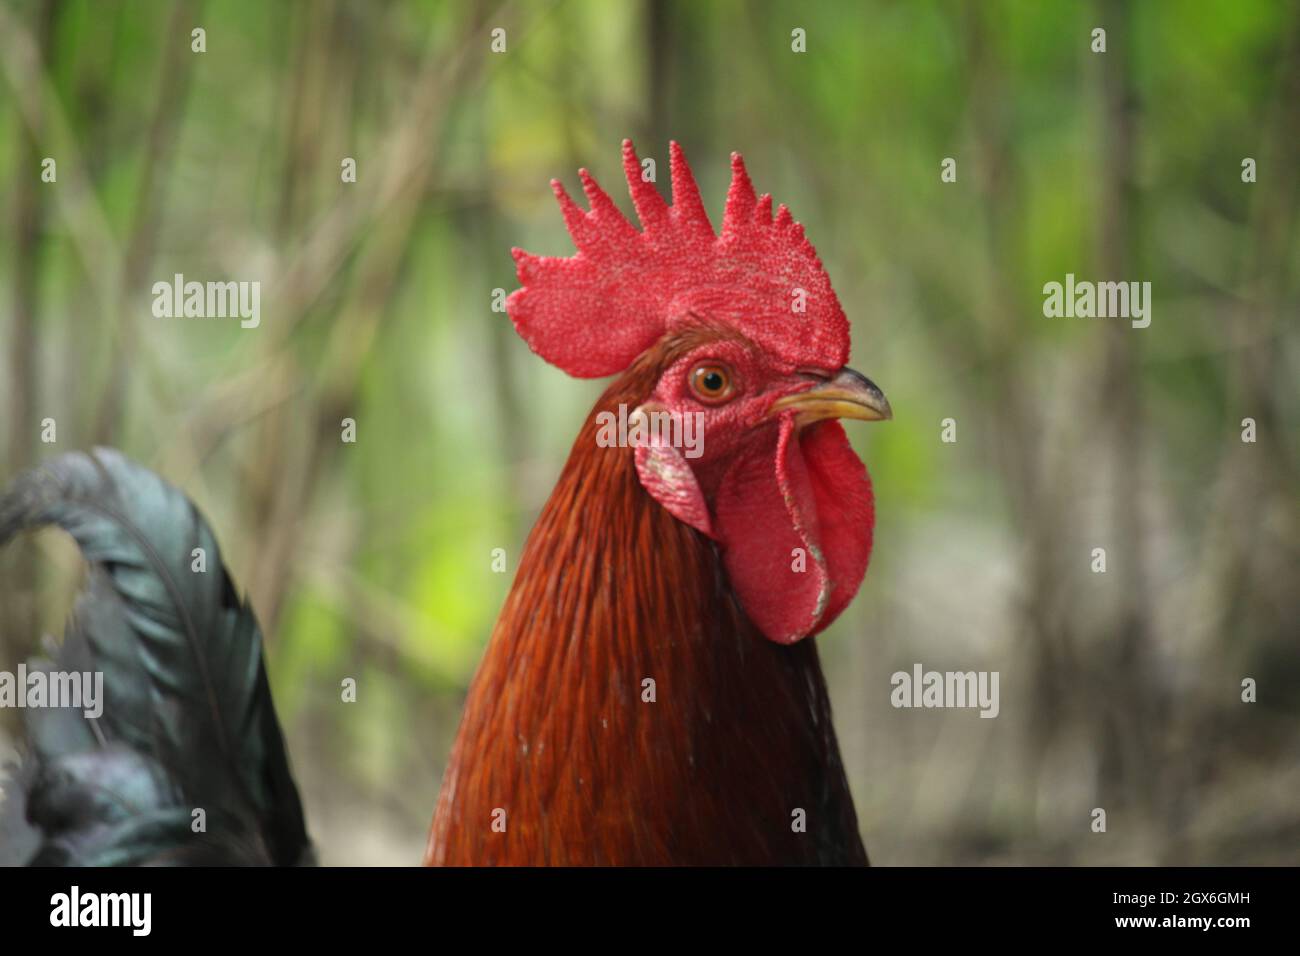 Portrait of a red rooste. The breed of rooster is bangladeshi Stock Photo